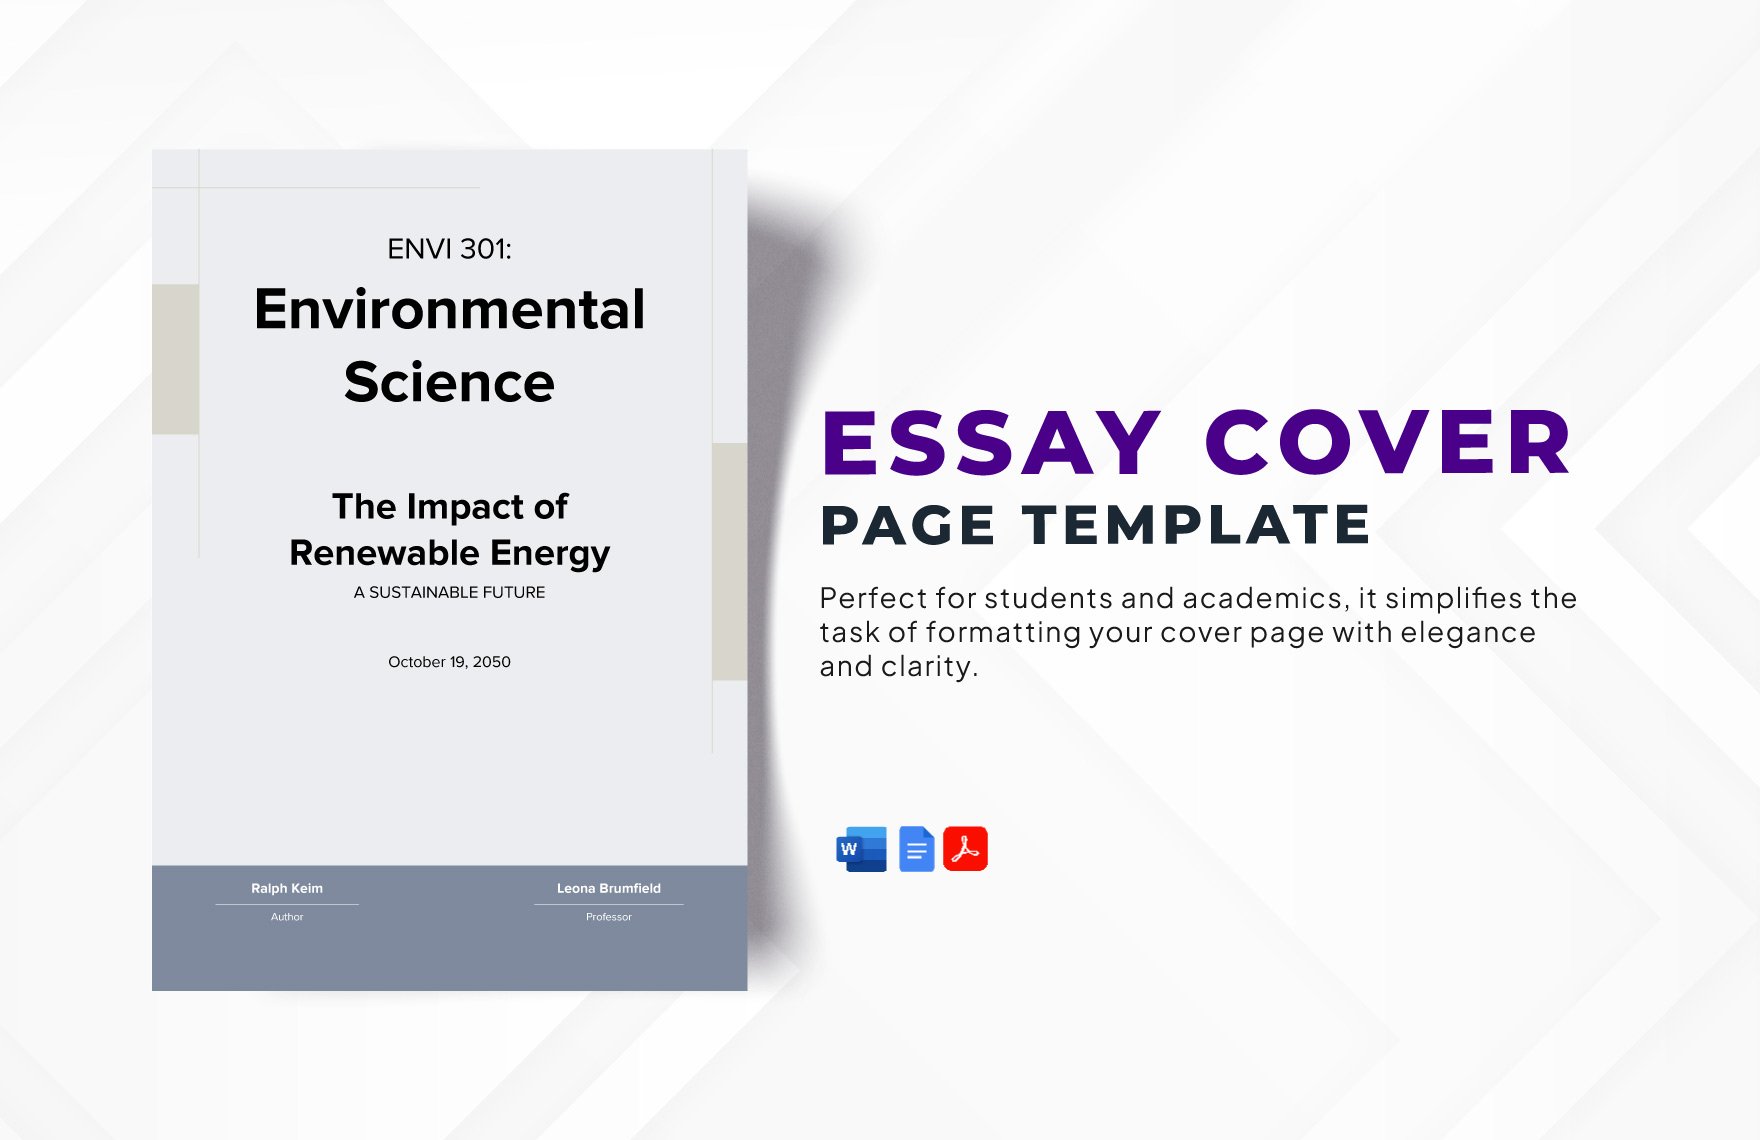 Essay Cover Page Template